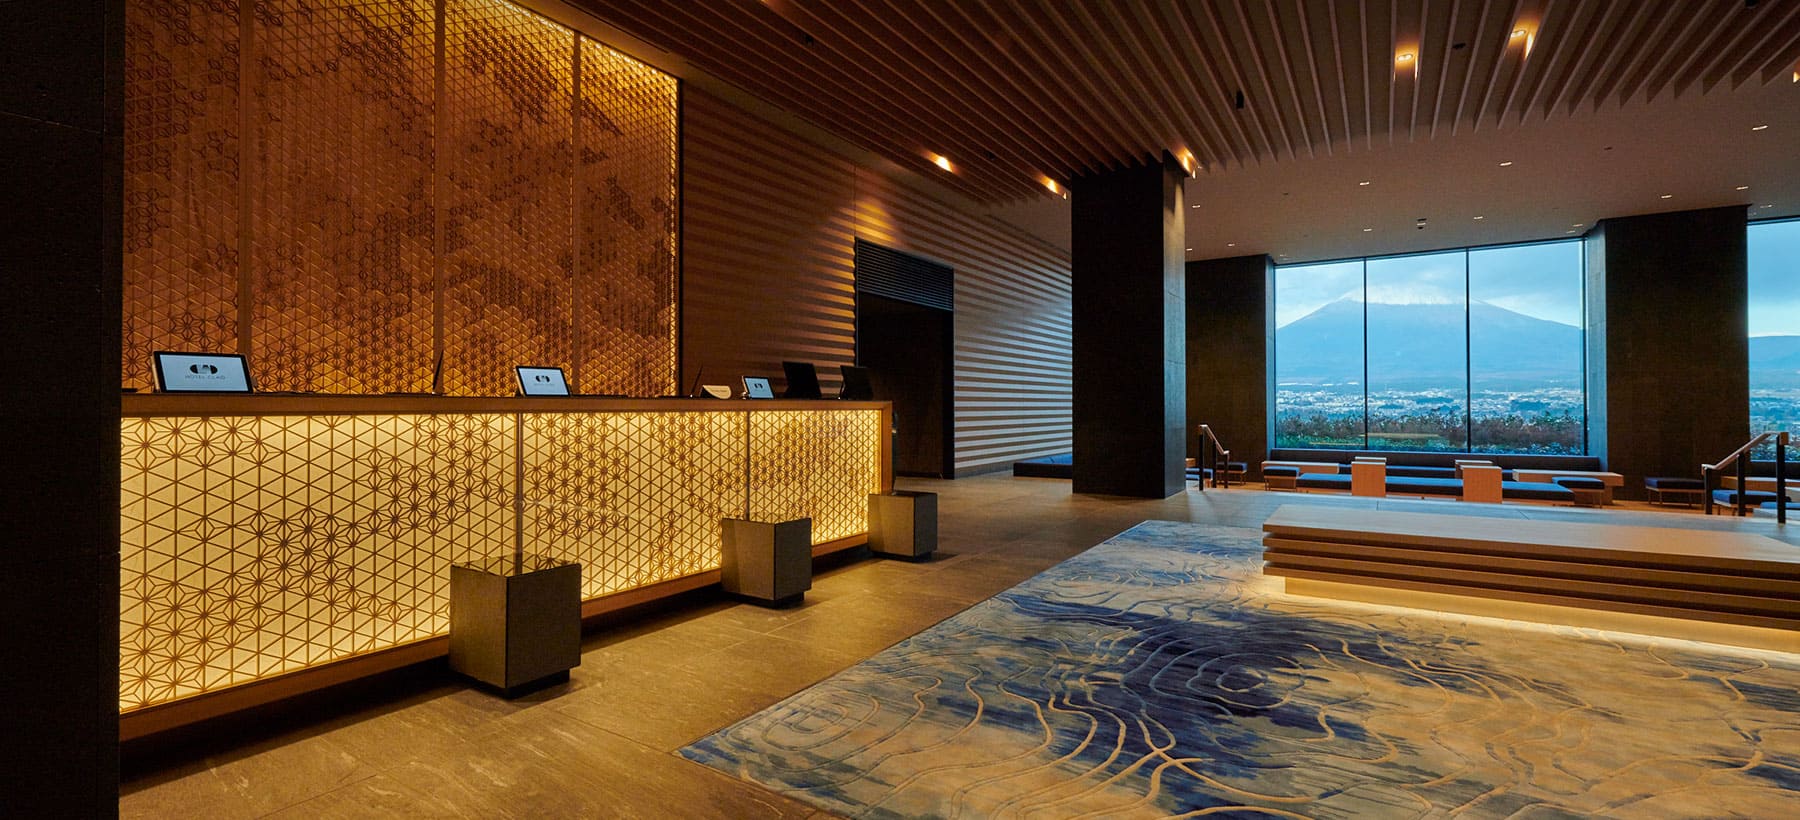 Within Gotemba Premium Outlets [Official] HOTEL CLAD